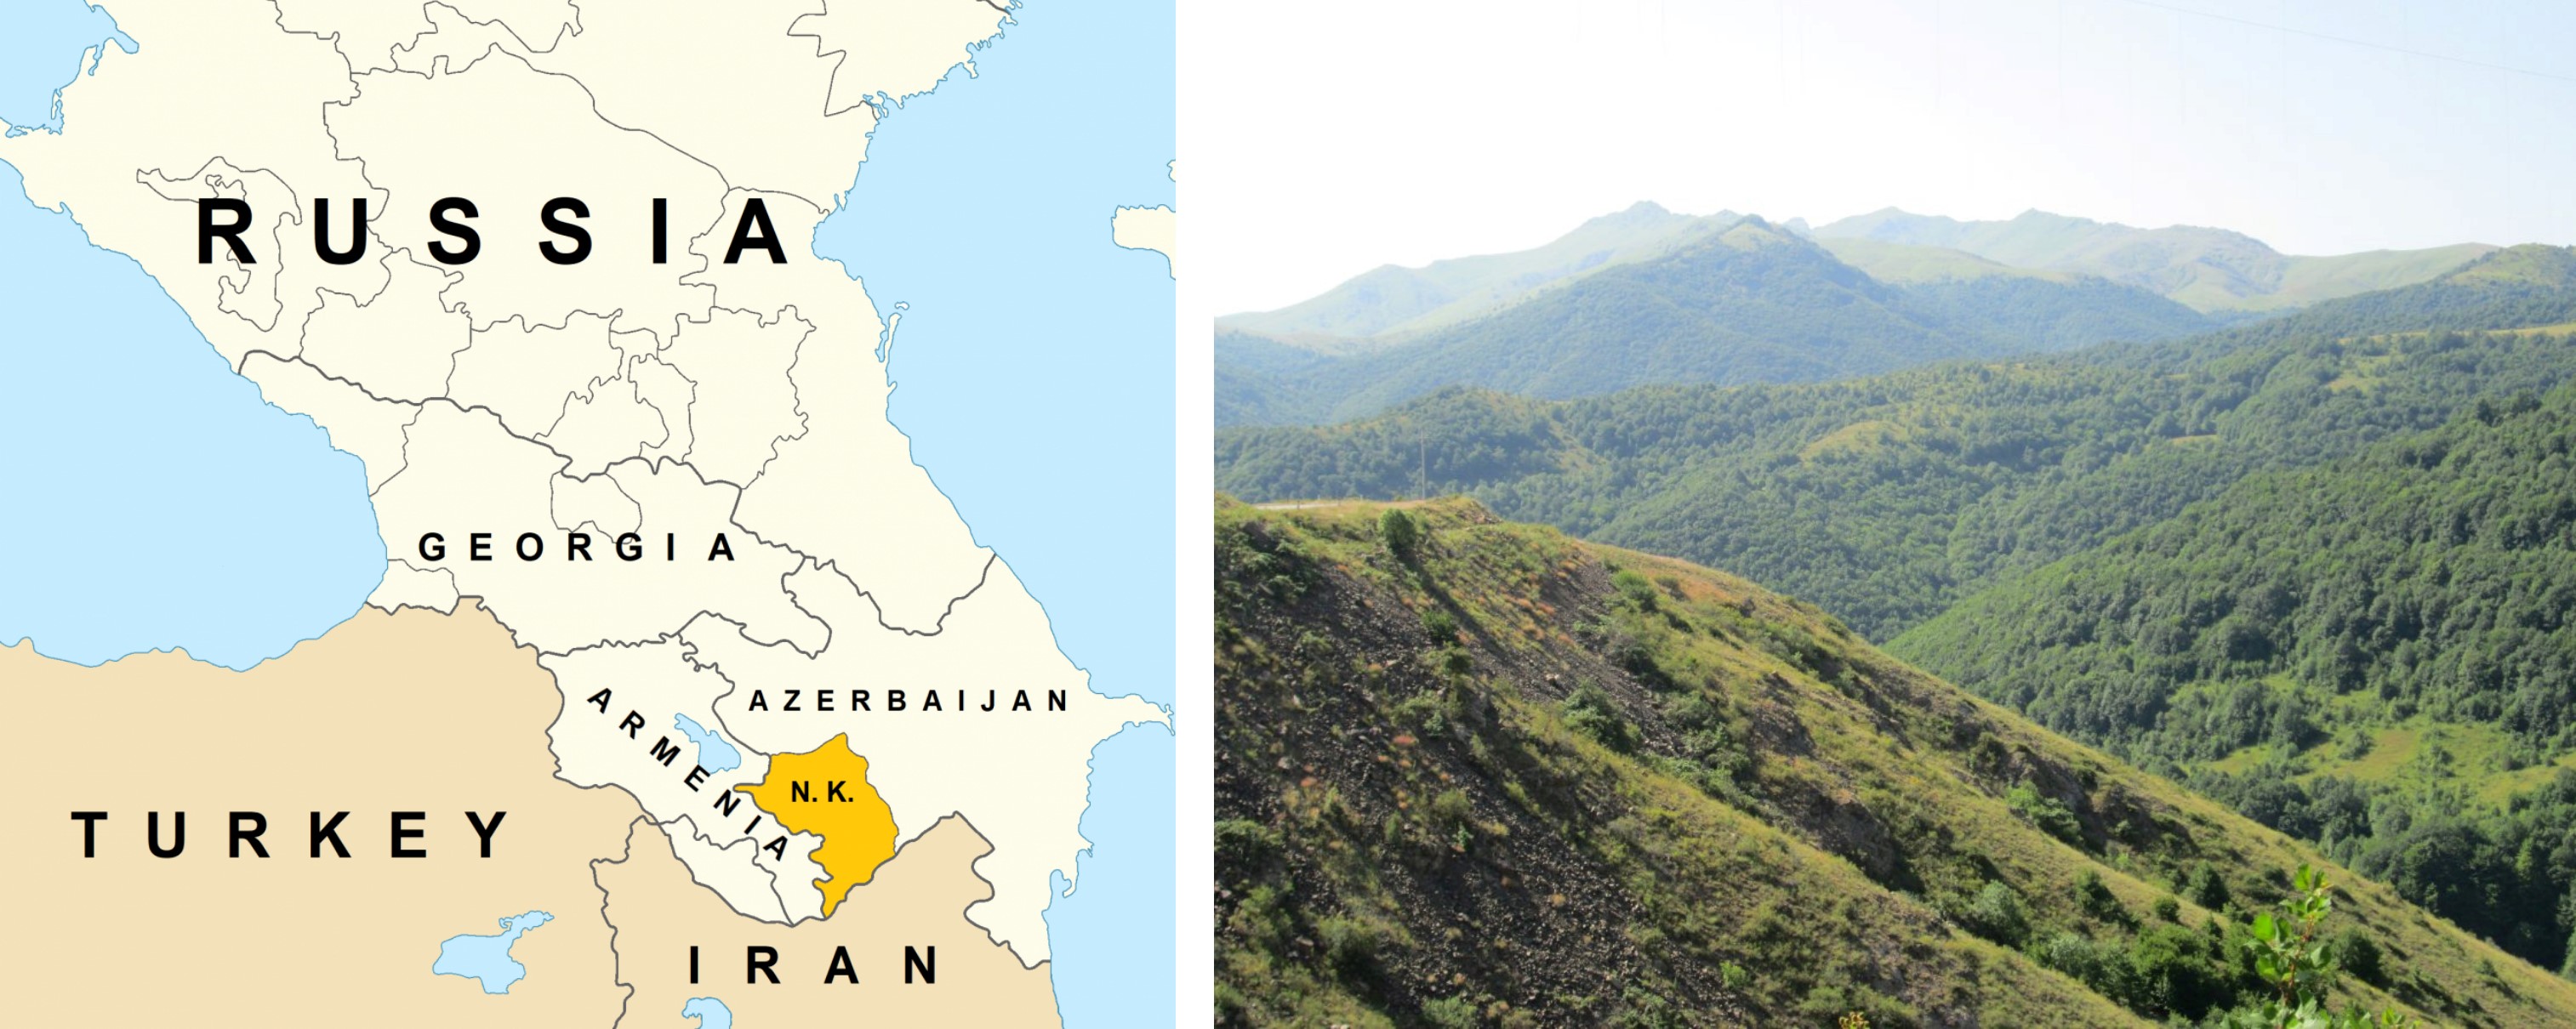 On the left, map of post-Soviet Caucasus. On the right, the mountainous landscape of Nagorno-Karabakh.